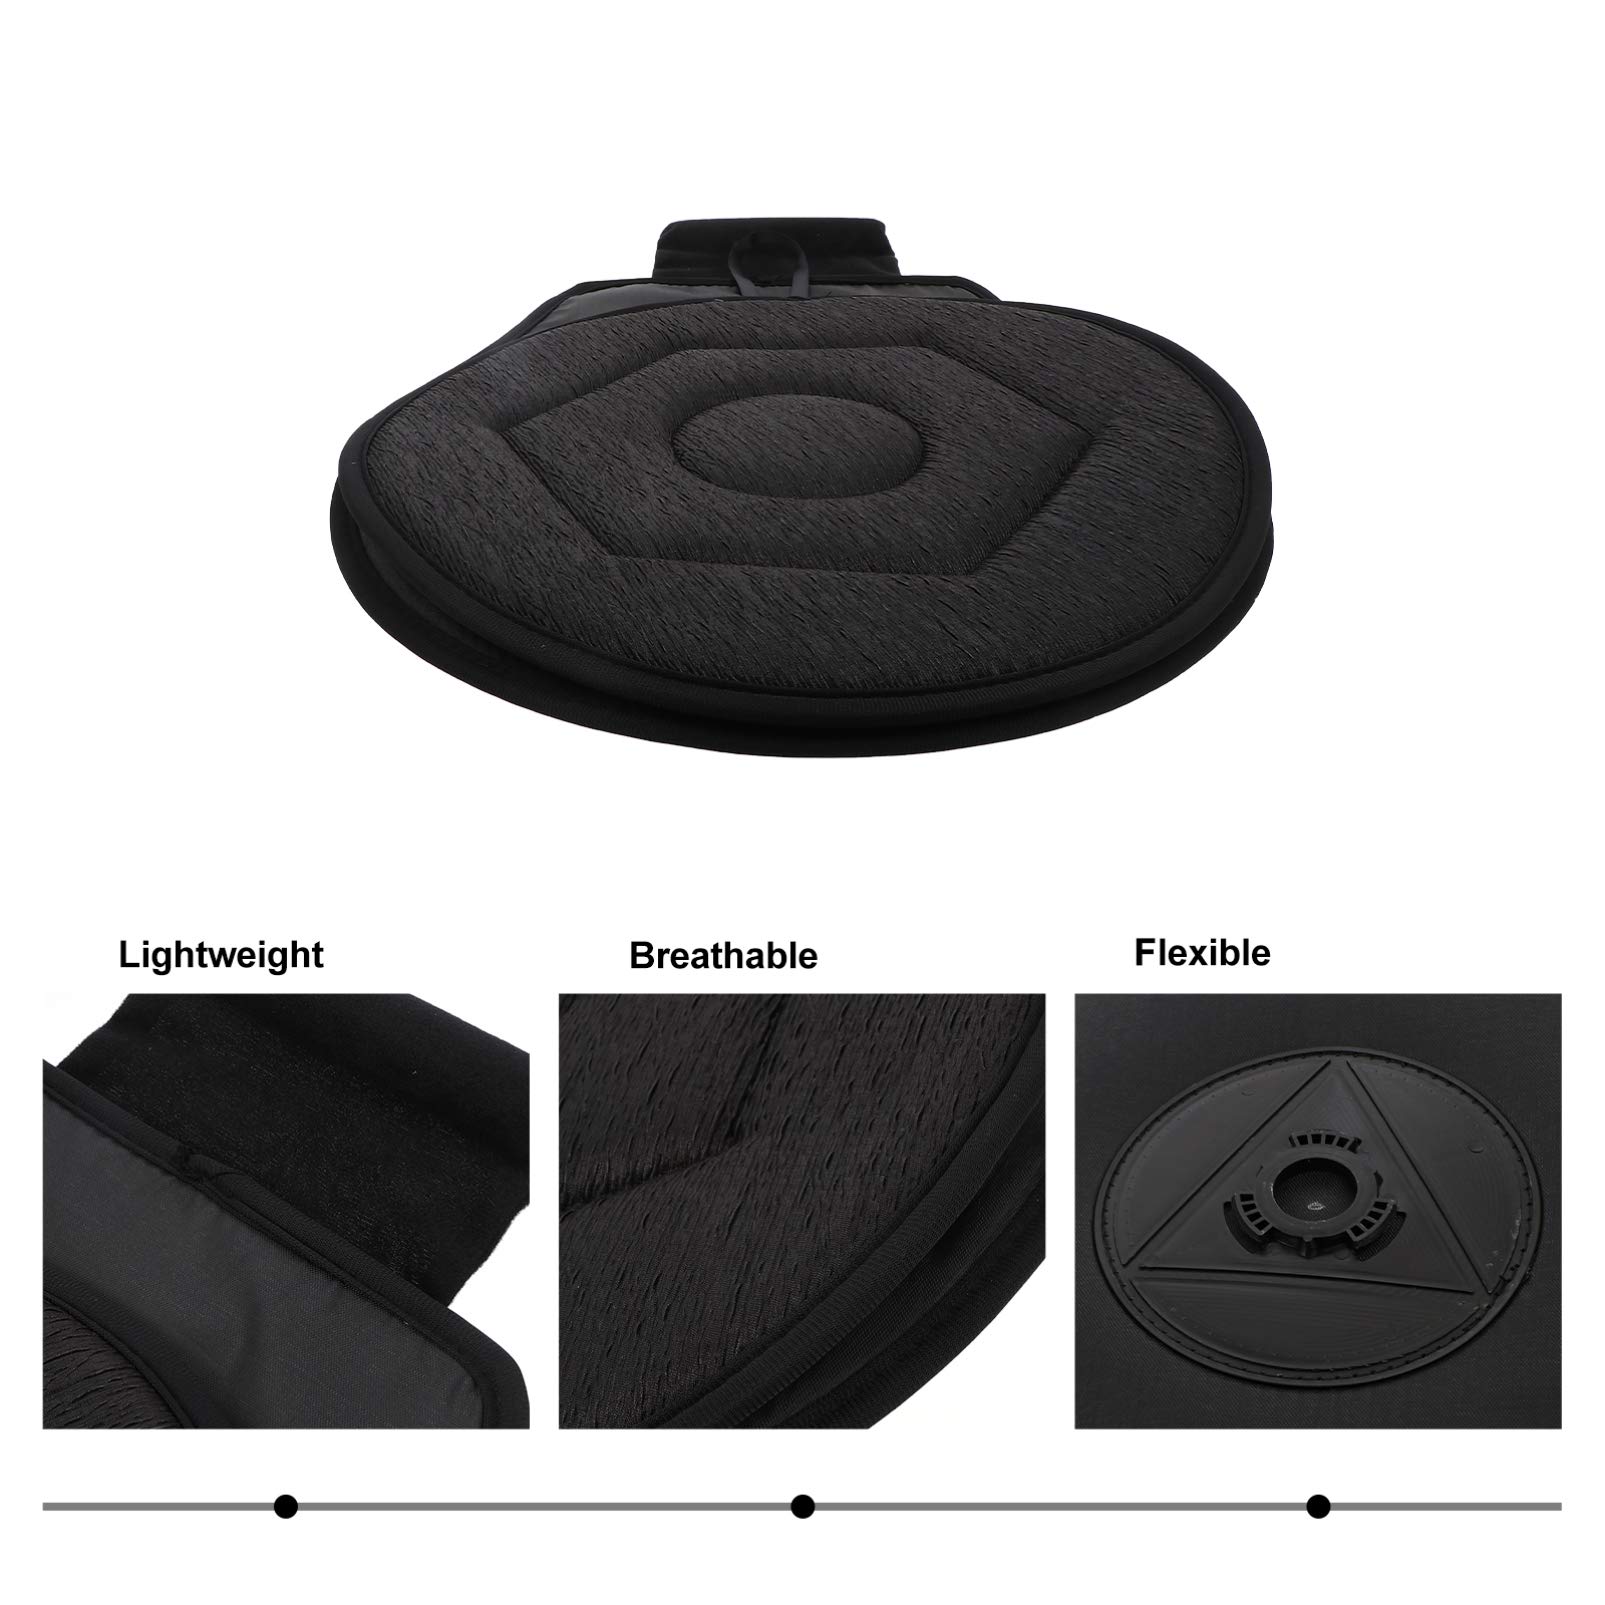 EXCEART 360 Degree Swivel Seat Cushion Rotating Swivel Car Seat Cushion Lumbar Support Pillow for Car Chair and Seat Swivel Car Chair Pad (Black)